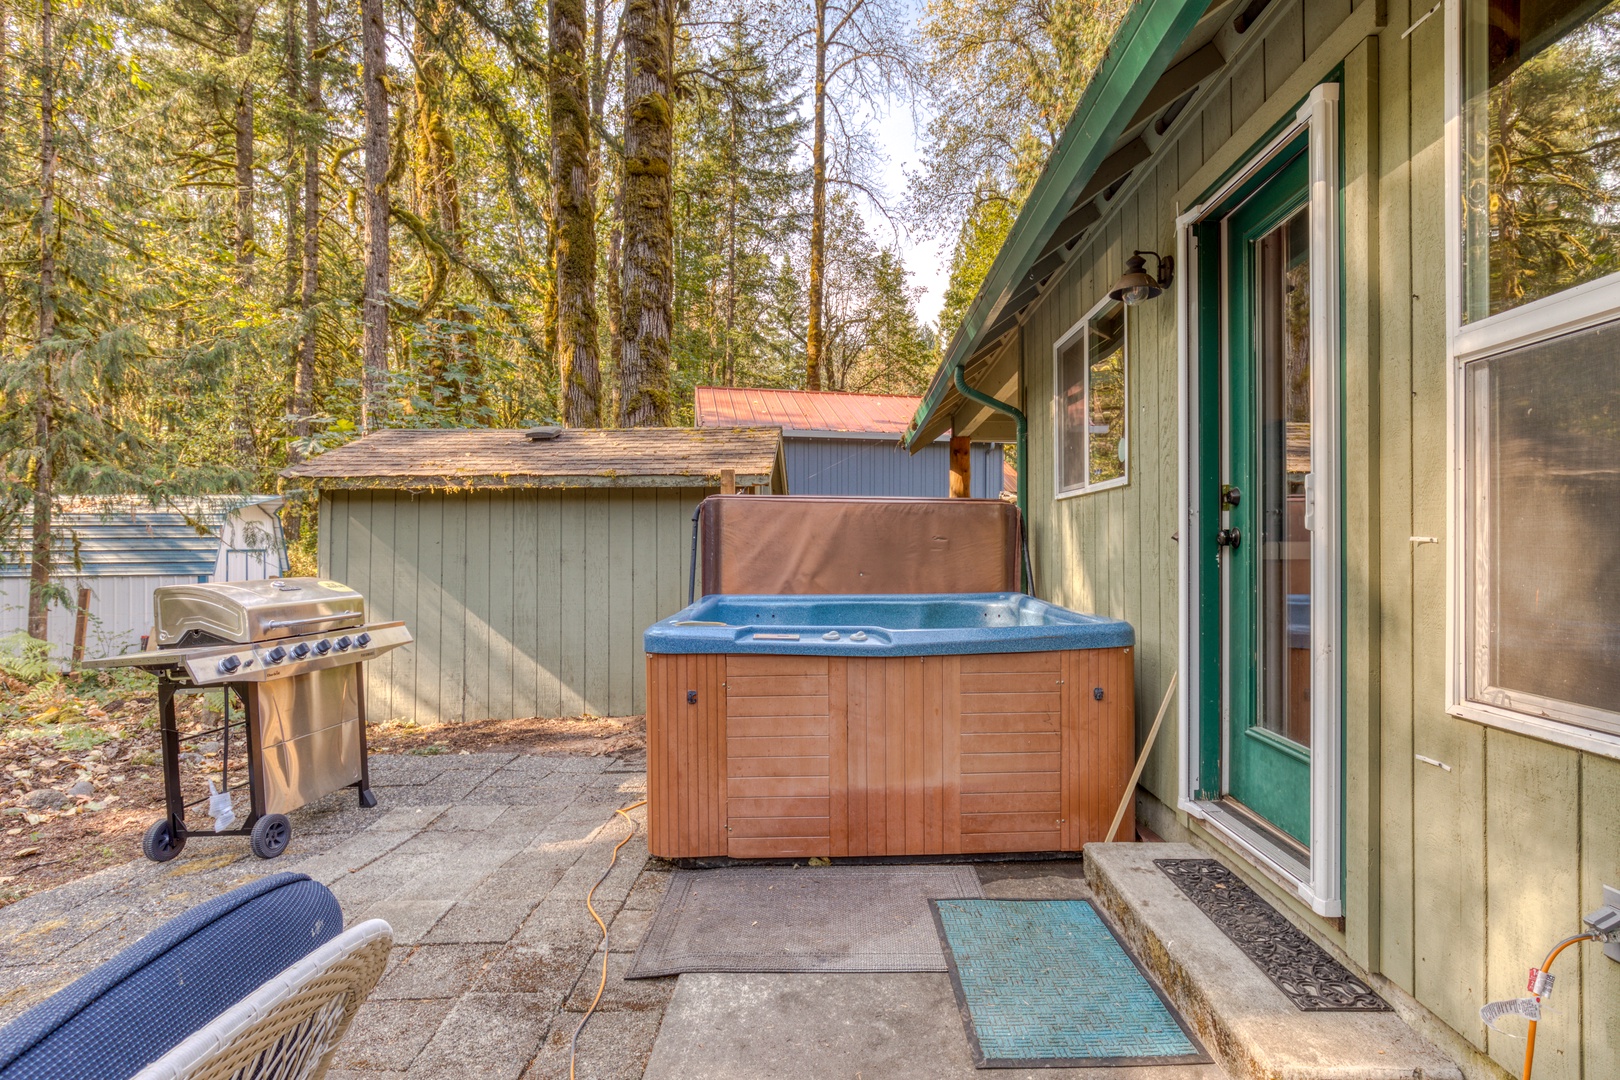 Brightwood Vacation Rentals, Riverside Retreat - Take a warm, relaxing soak in the private hot tub